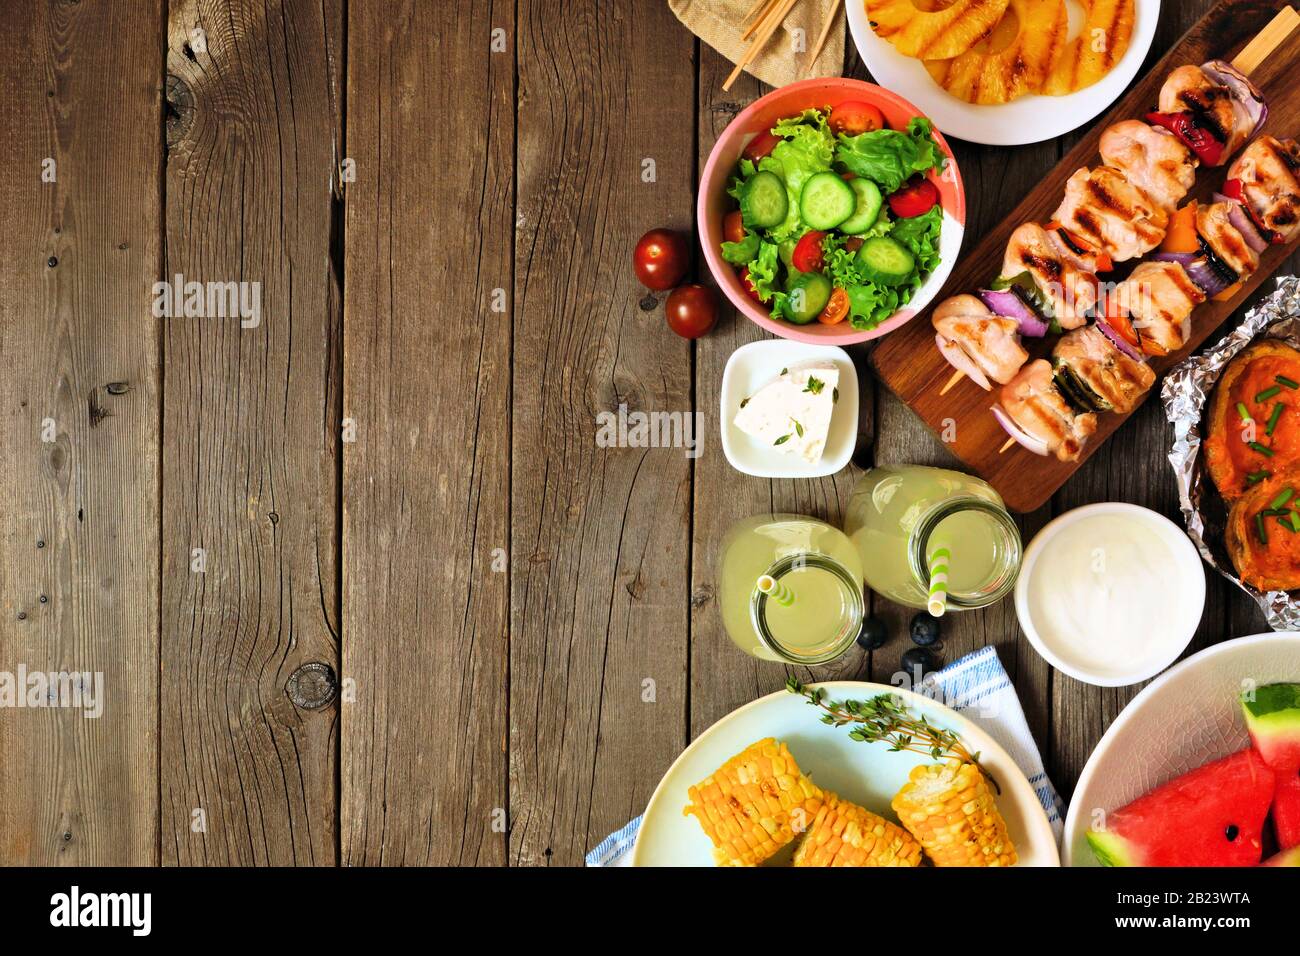 Summer BBQ or picnic food side border. Selection of grilled meat, fruits, salad and potatoes. Top view over a rustic wood background. Copy space. Stock Photo